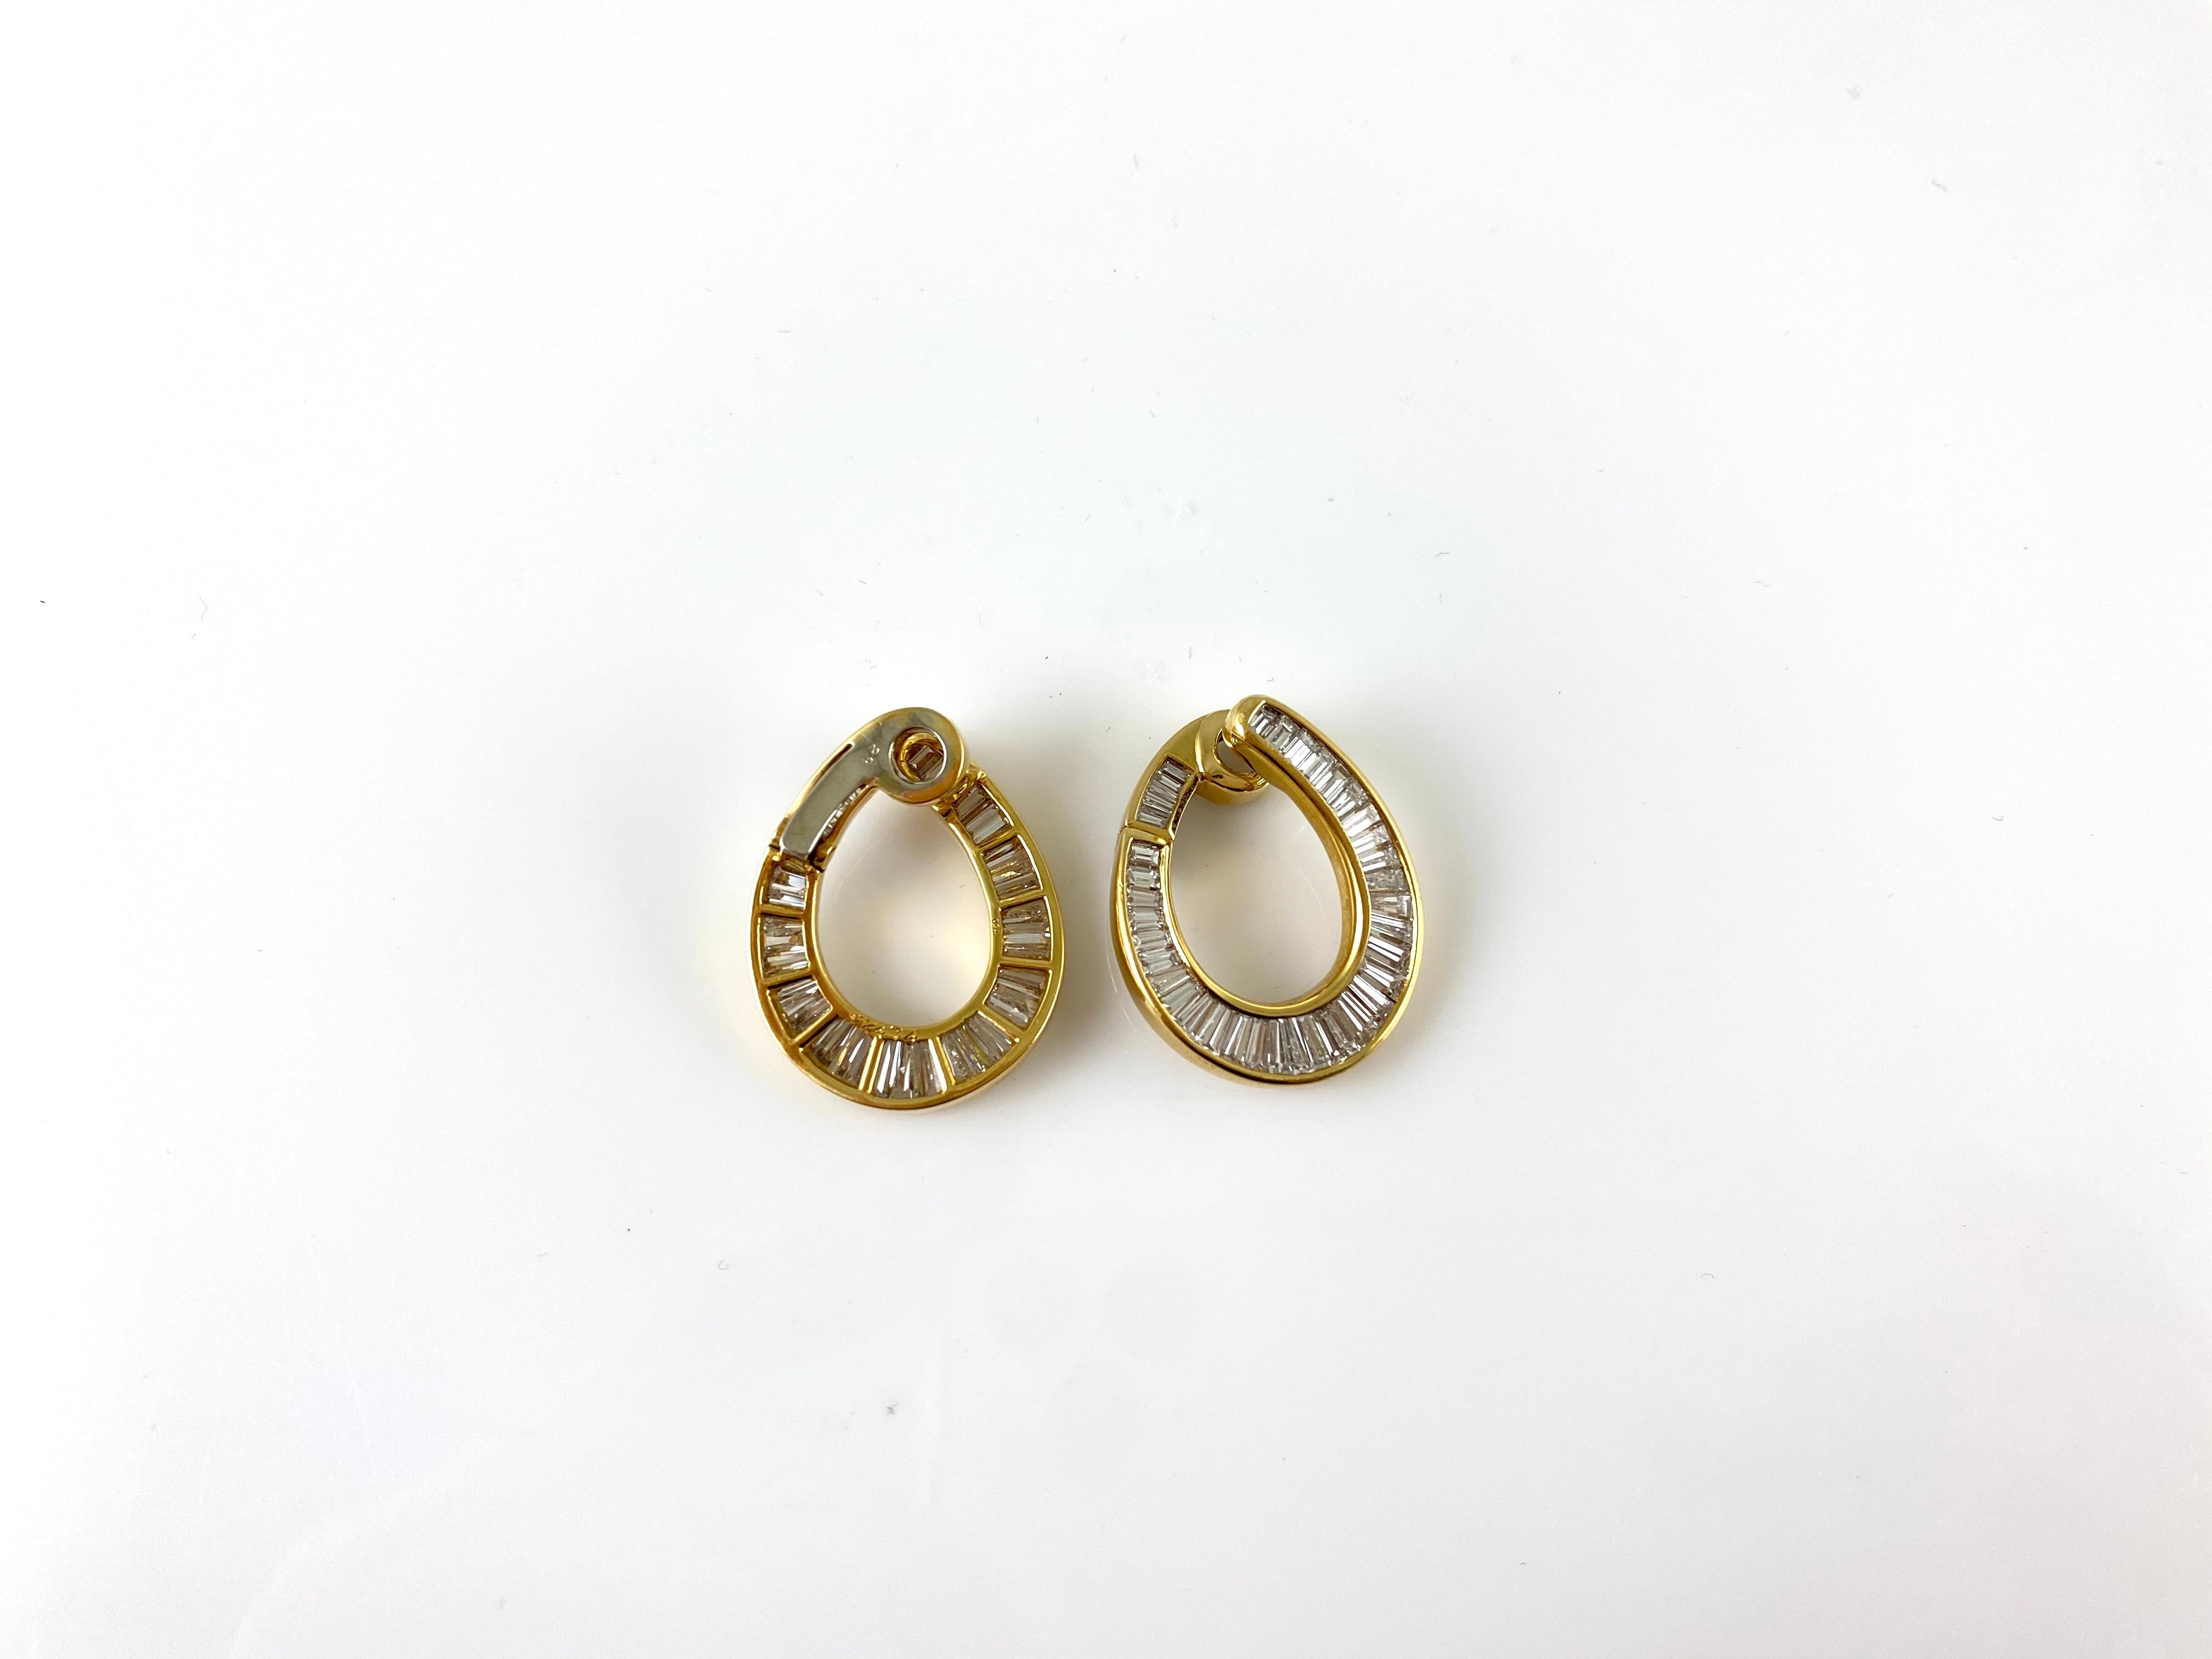 The earrings are finely crafted in 18k yellow gold with emerald cut diamonds weighing approximately total of 5.00 carat.
Circa 1980.